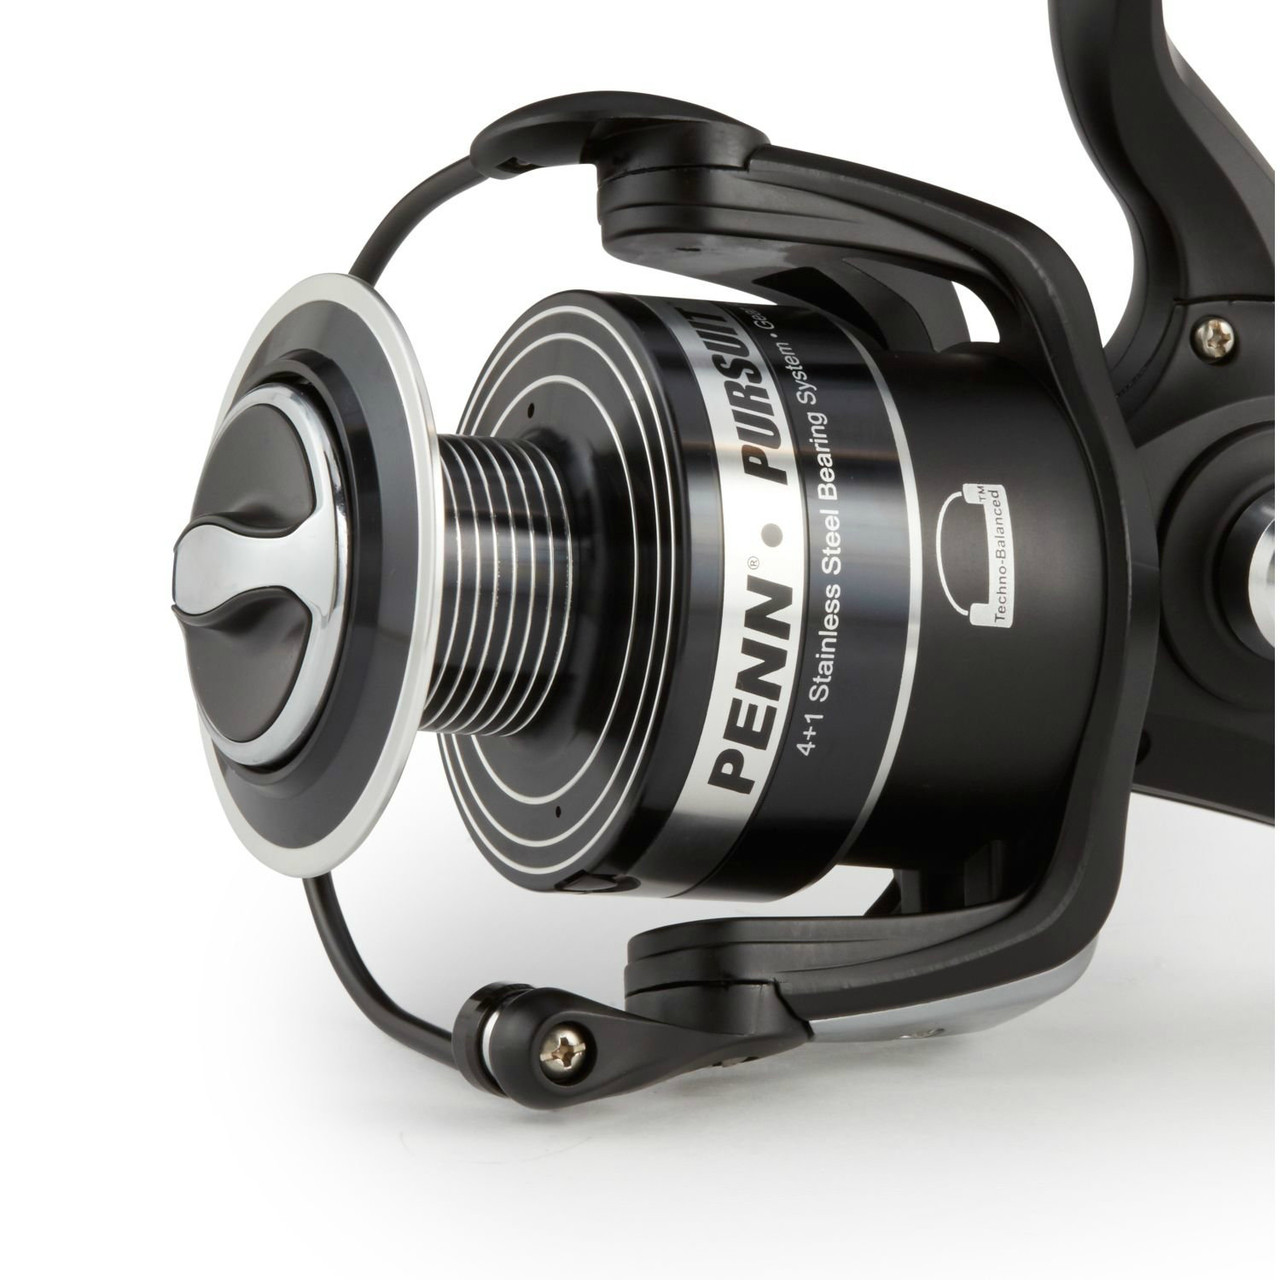 PENN Pursuit II 8000 Spinning Fishing Reel 4.3:1 Clam Pack (PURII8000CP) -  Go Outdoor Gear